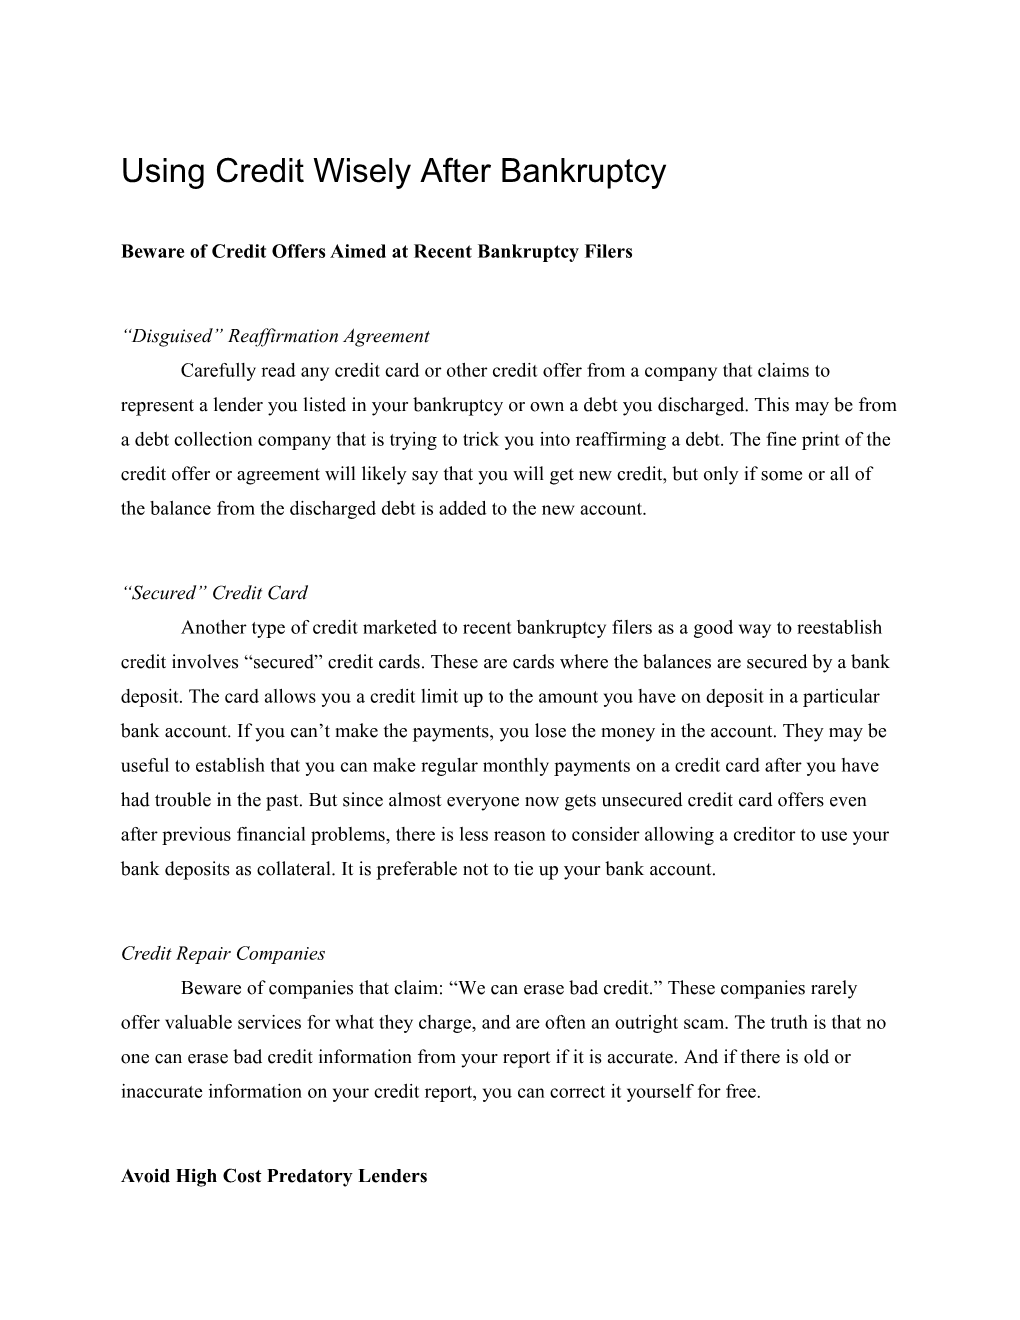 Beware of Credit Offers Aimed at Recent Bankruptcy Filers